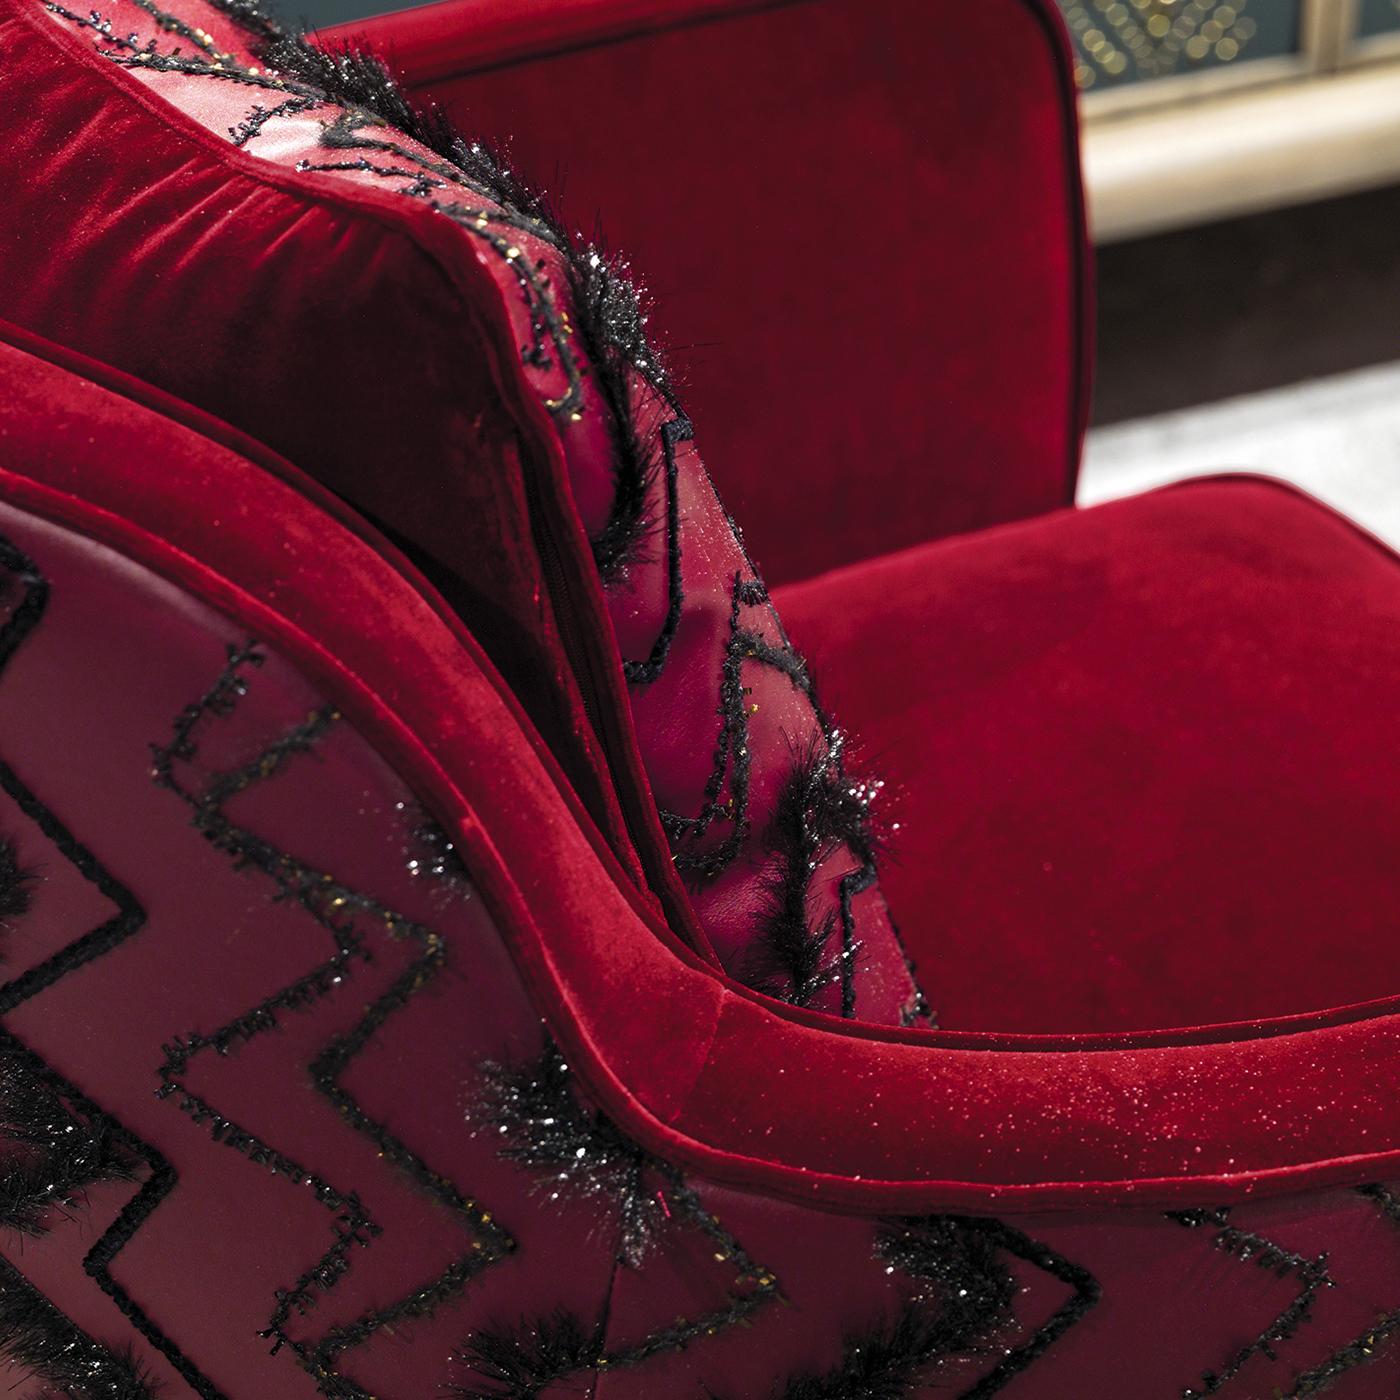 As if straight from a glamorous lounge, the Emily armchair exudes luxury where minimalism just won't do. On a bronze-colored base, the chair is upholstered in dramatic red cotton velvet and faux leather, then accented with zig-zag stitching. A